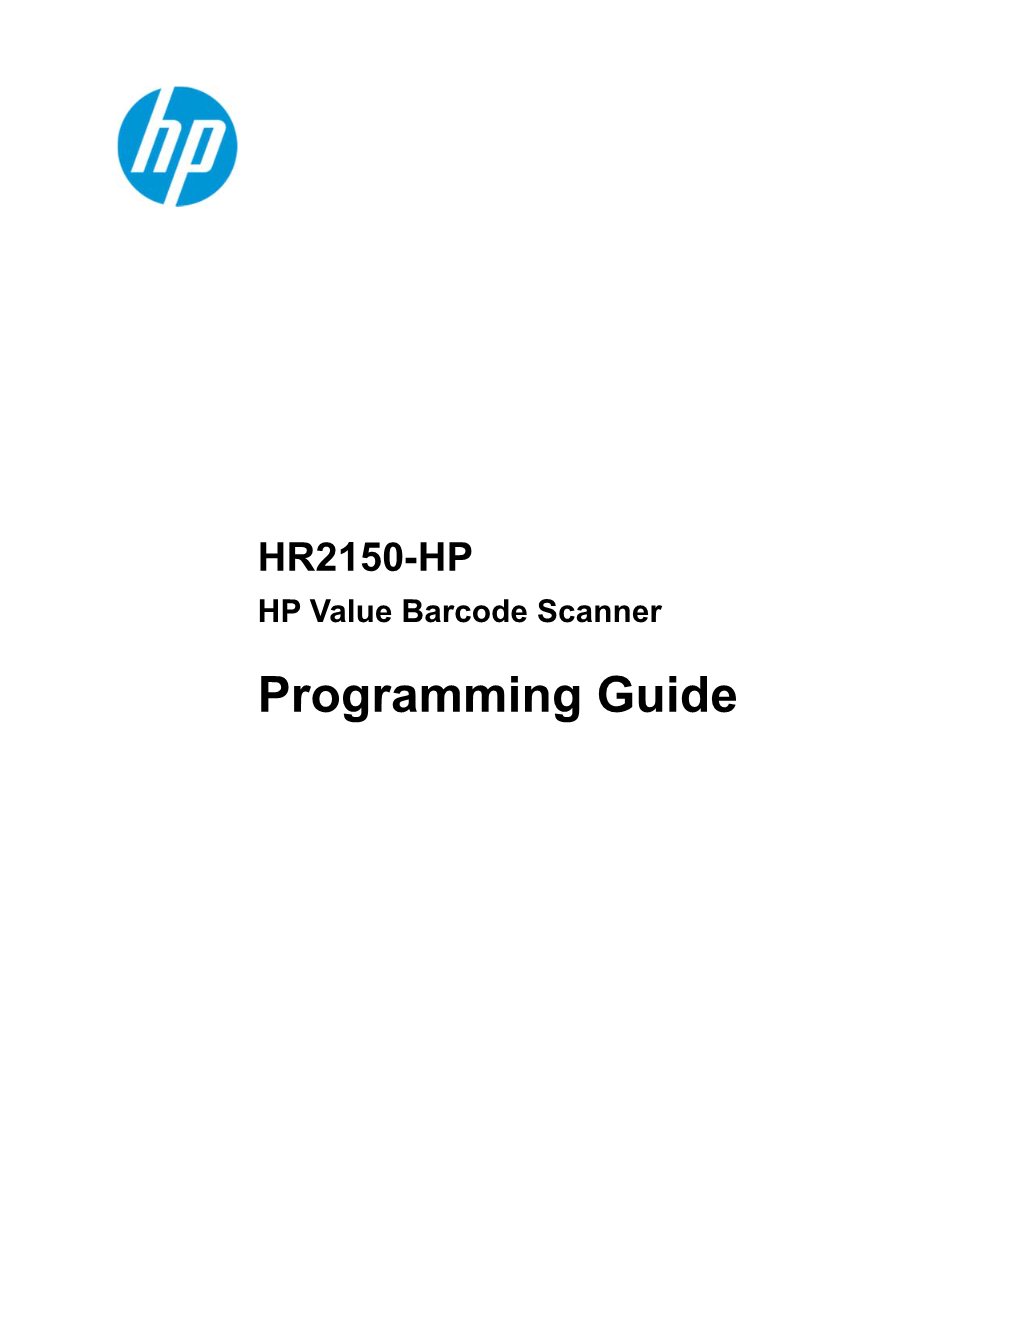 HP Value Barcode Scanner Programming Guide